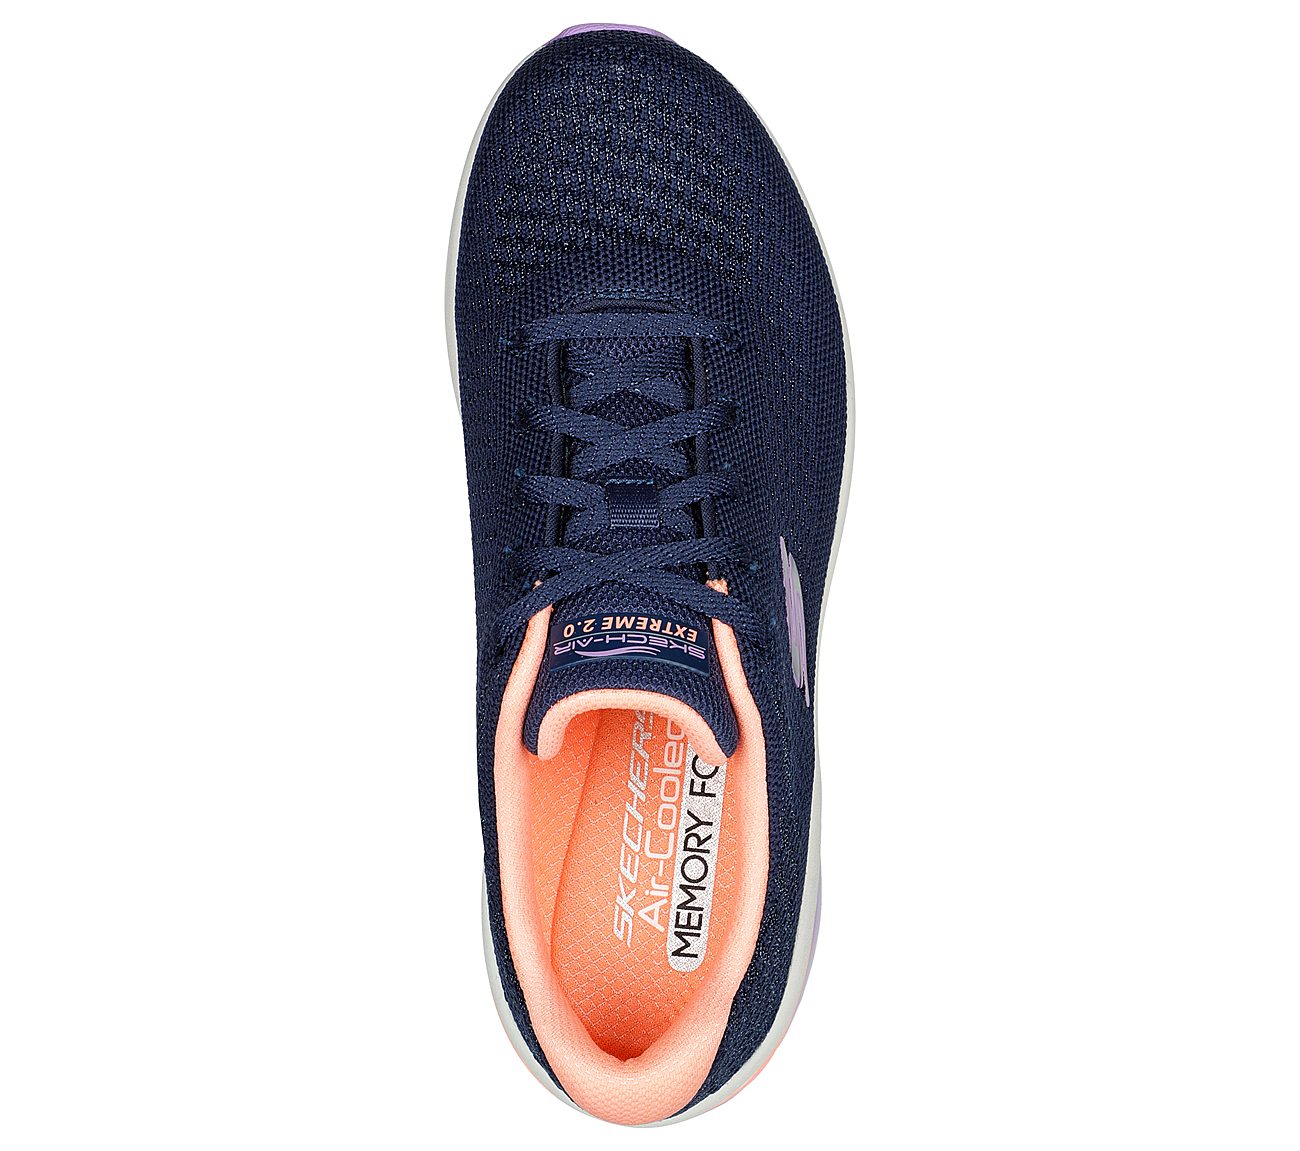 SKECH-AIR EXTREME 2.0-CLASSIC, NAVY/MULTI Footwear Top View